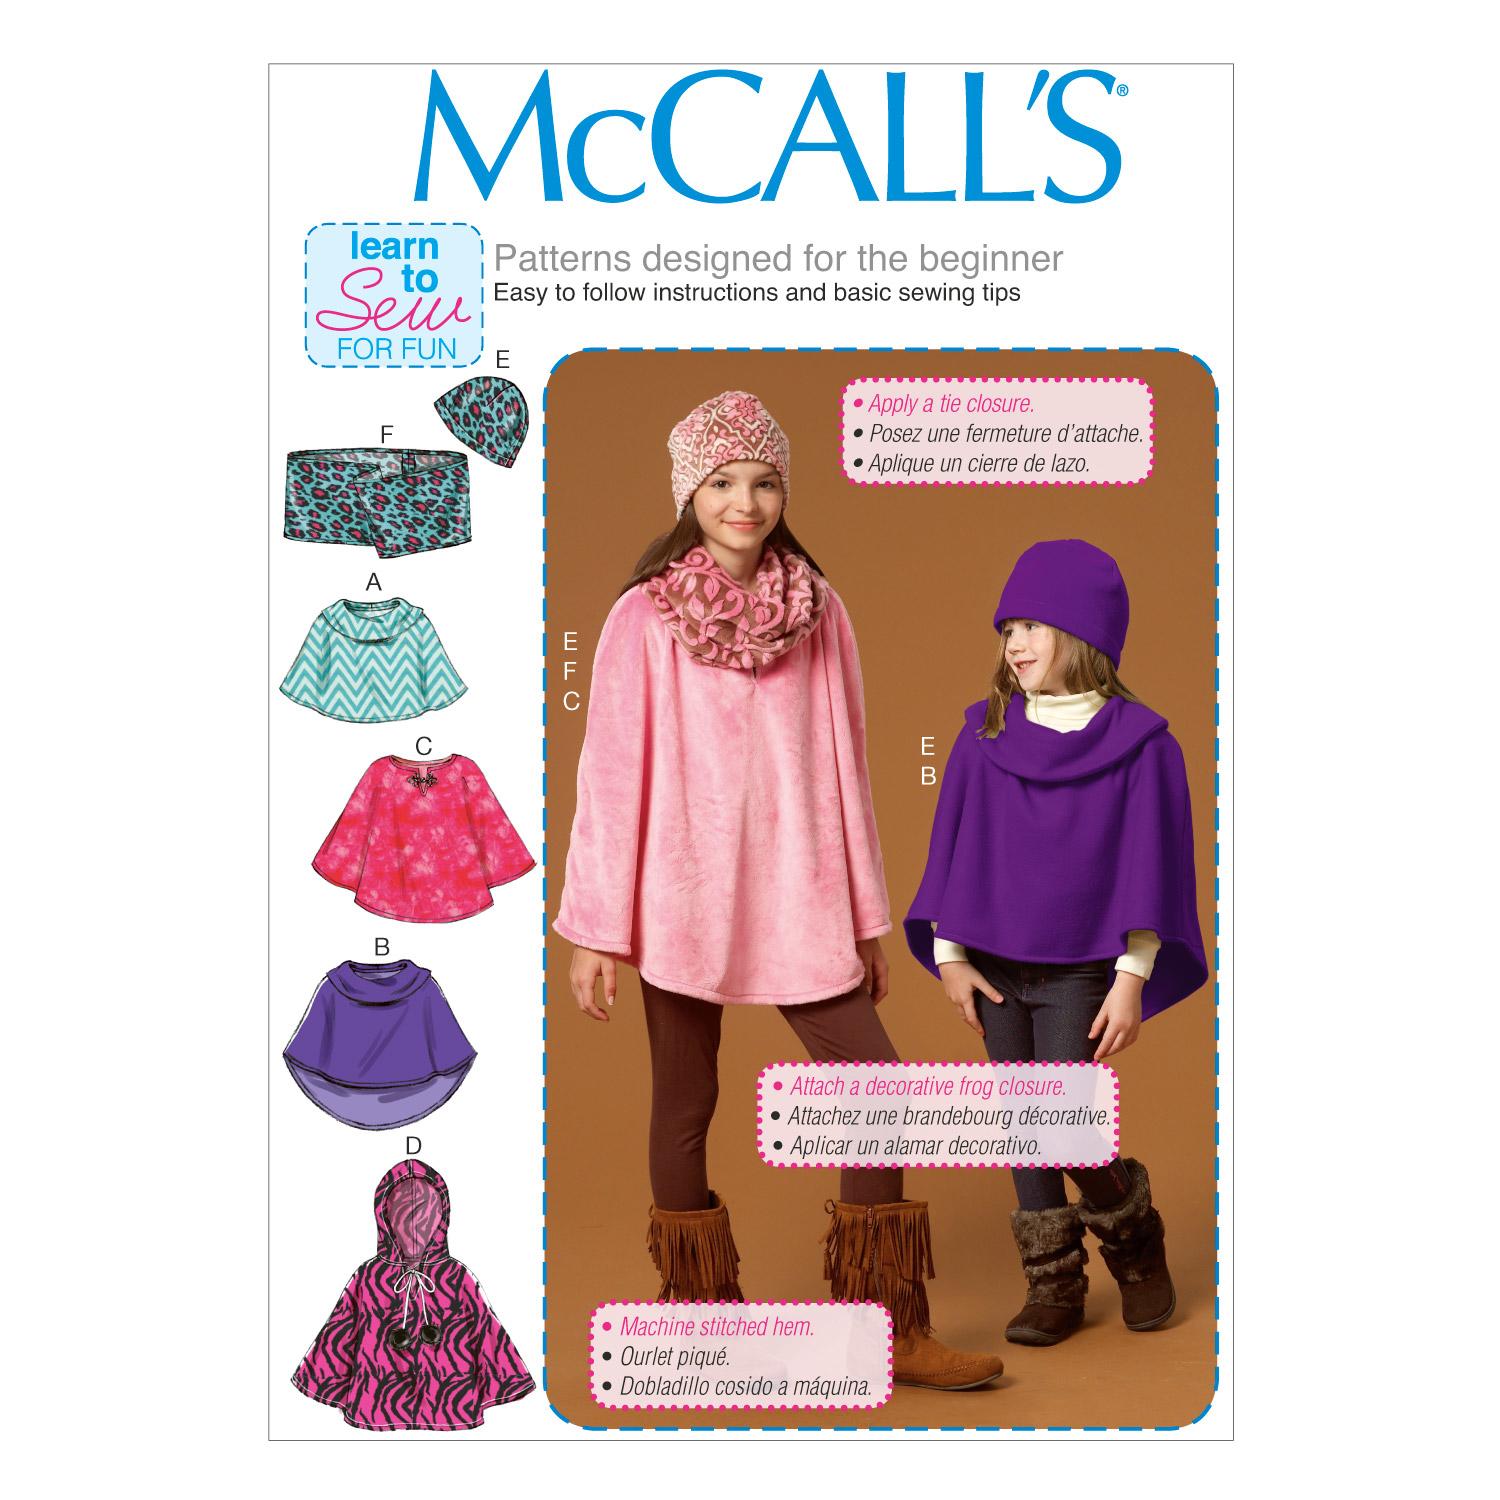 McCalls M7012 Children, Girls, Girls/Boys, Jackets/Vests, Learn To Sew for Fun, Learn to Sew<Br for Fun, Misses/Women/Girls